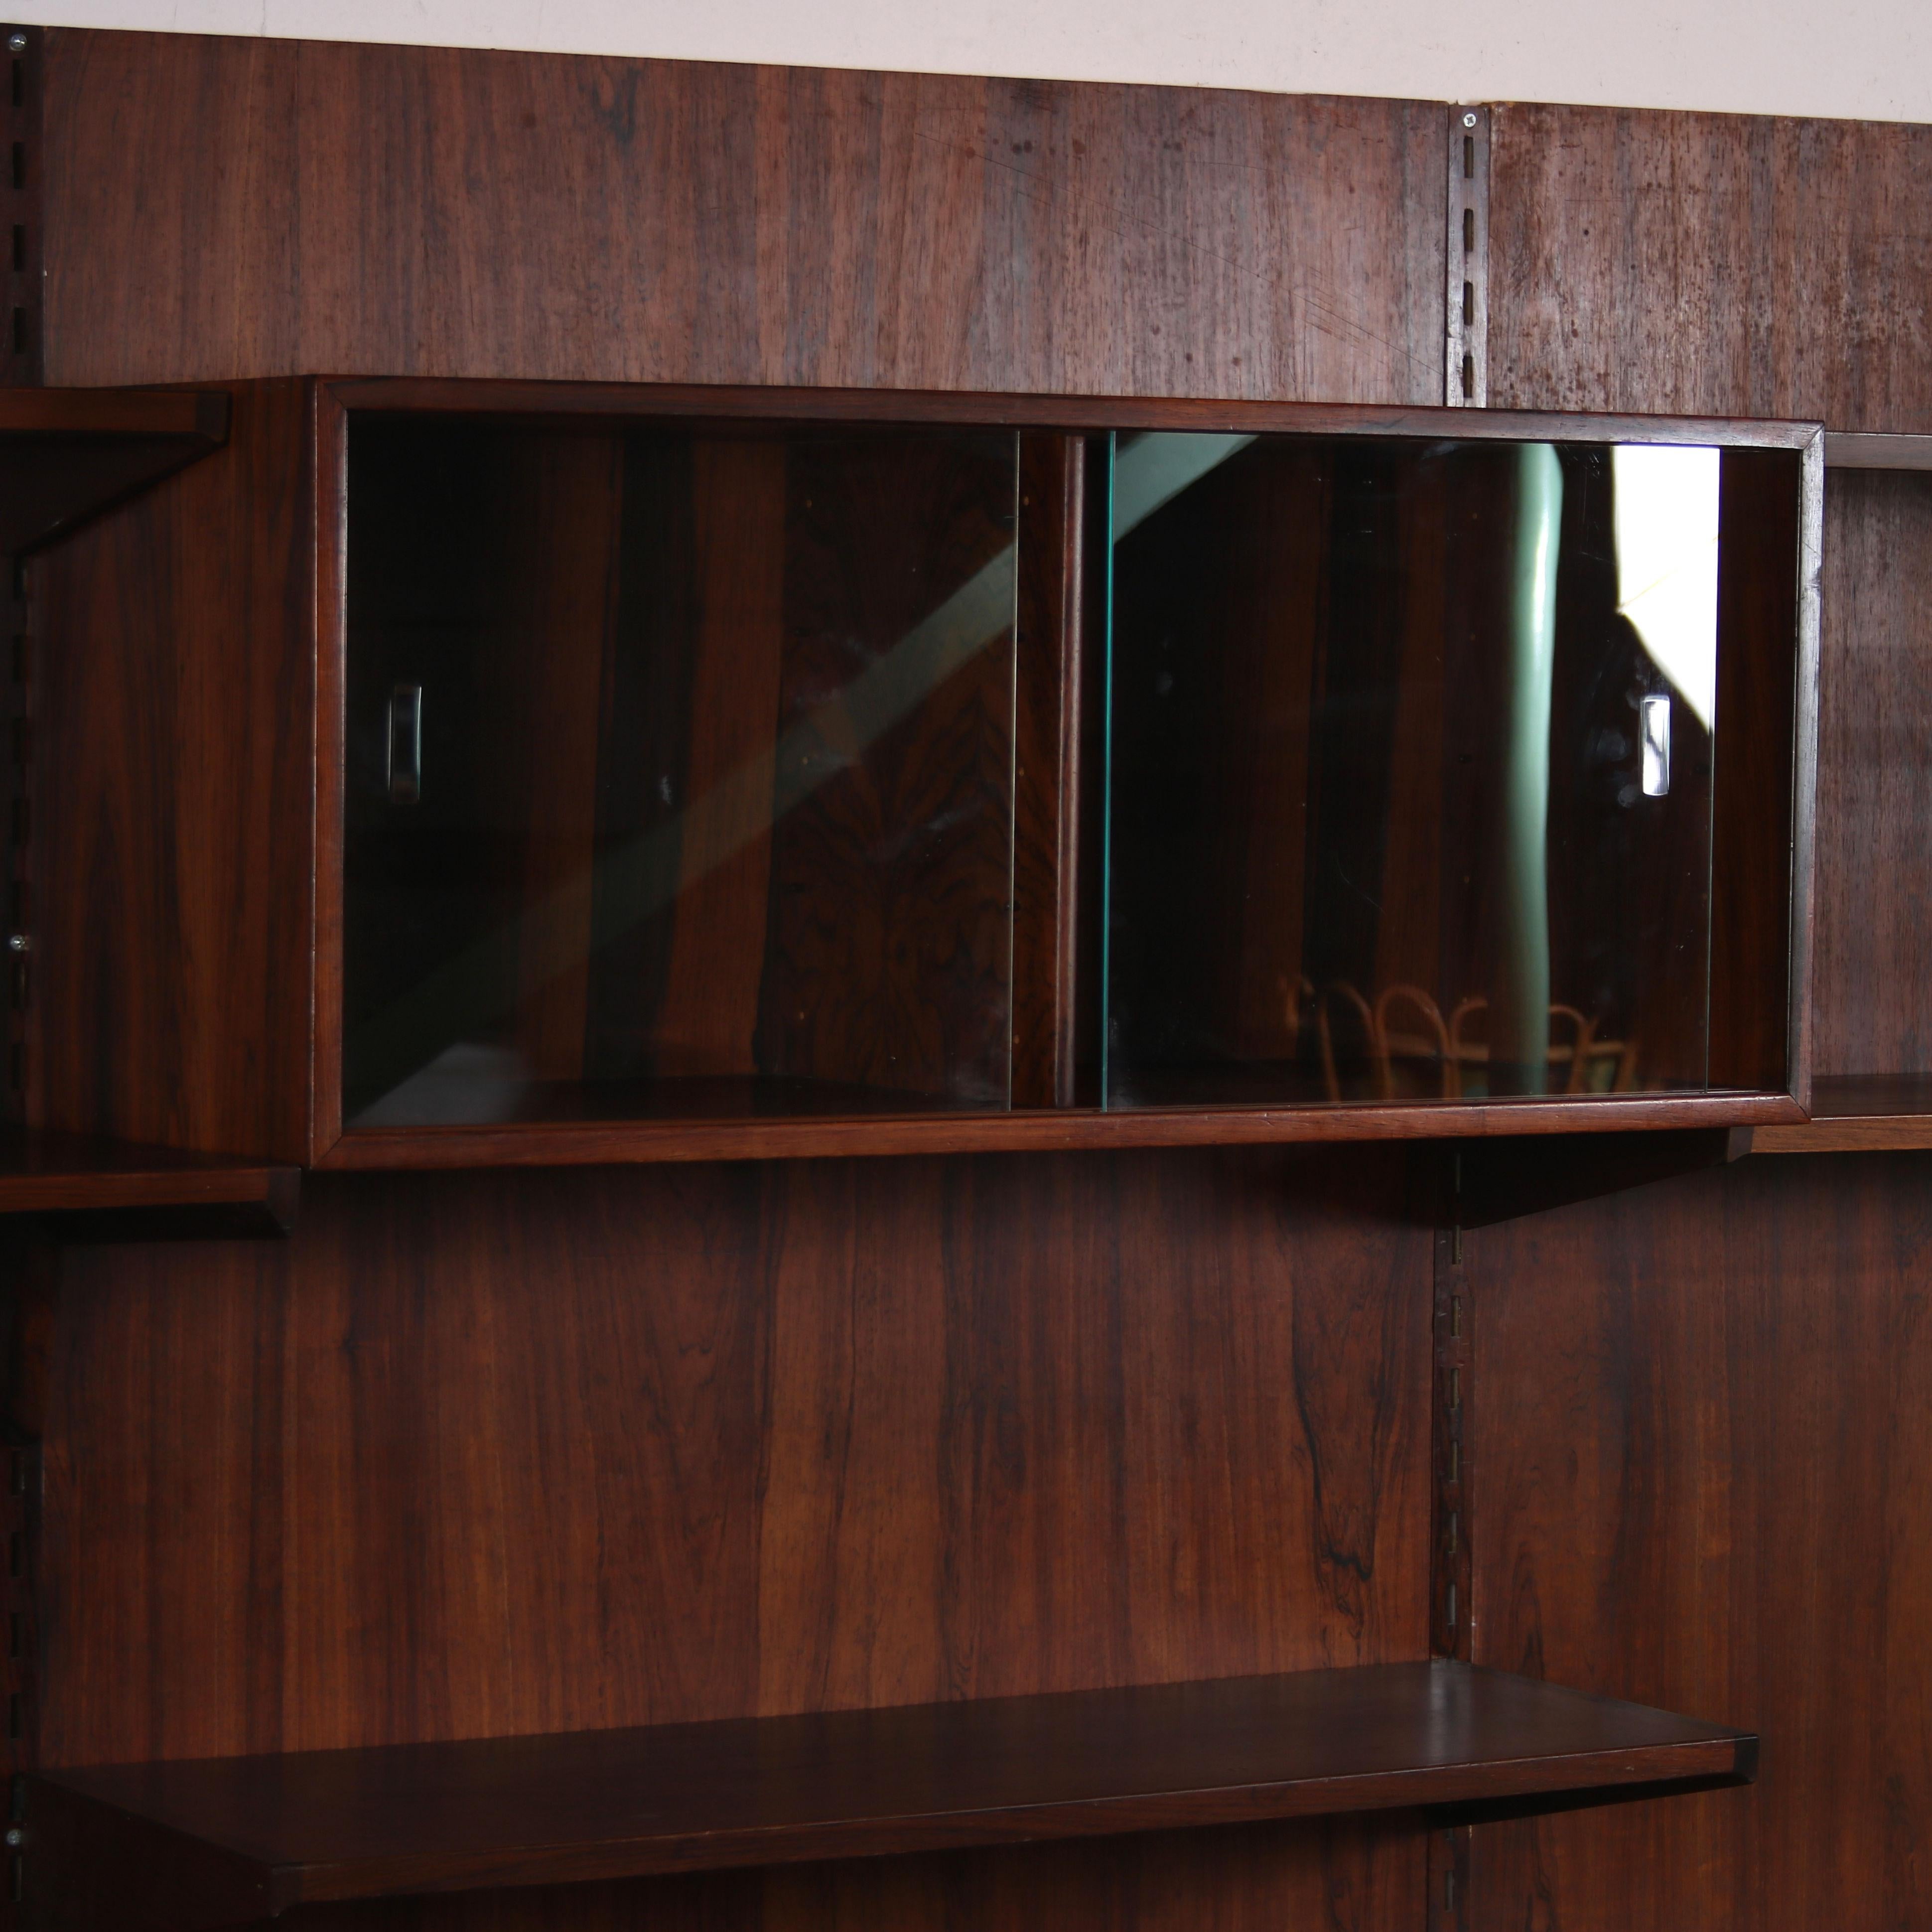 A beautiful, 3-unit wide wall mounted system cabinet desined by Kai Kristiansen and manufactured by FM Mobler in Denmark around 1950.

This large piece is made of high quality warm brown wood with metal details. The system structure of the piece